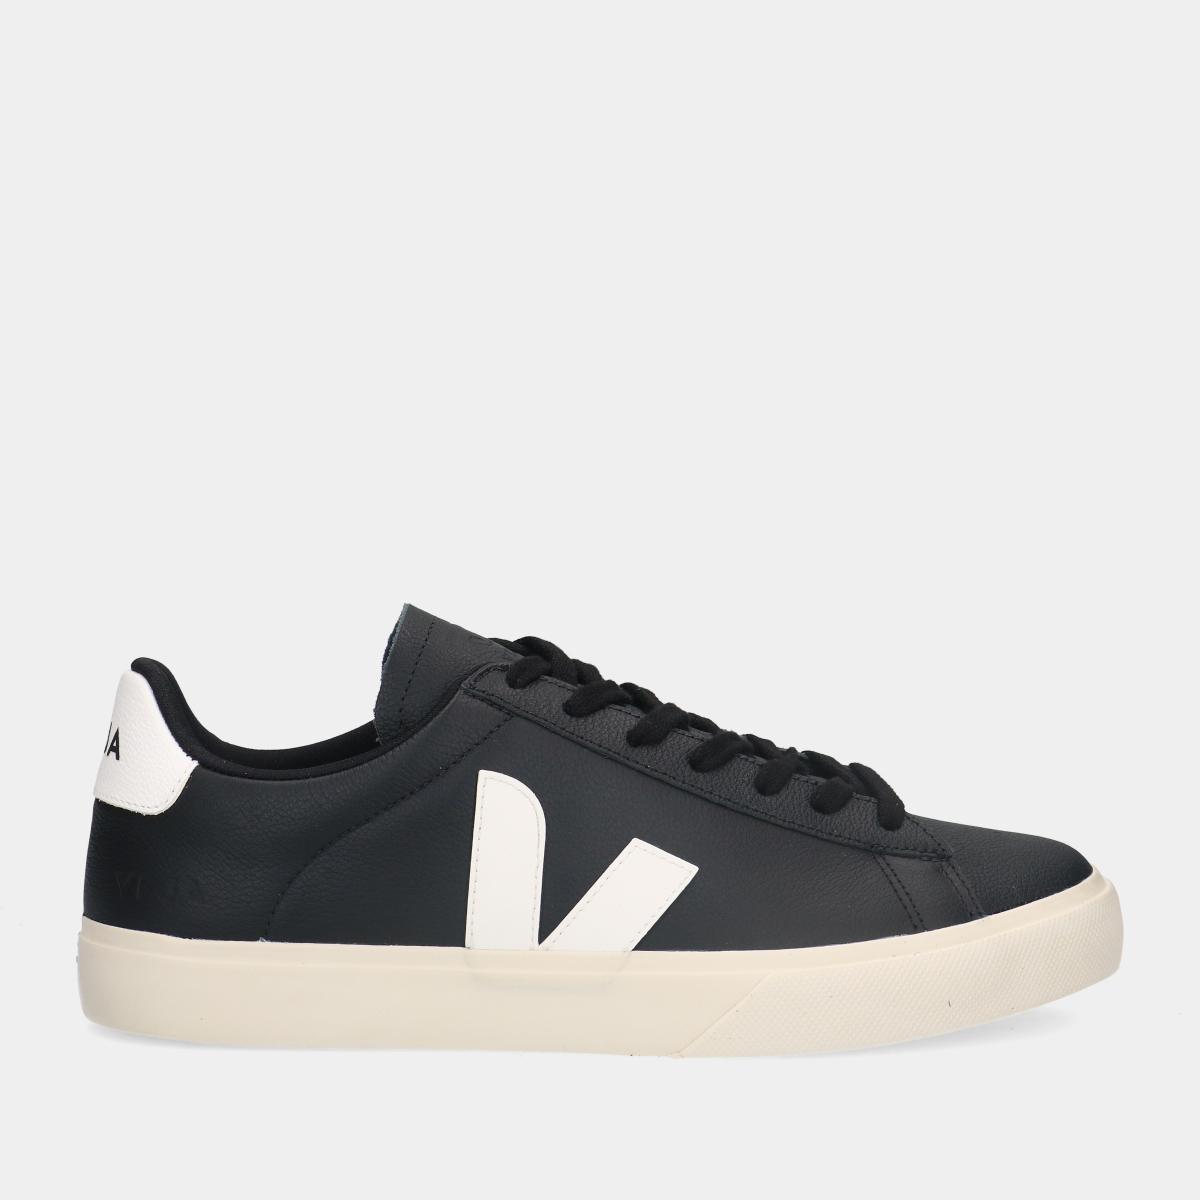 Veja Campo Black unisex sneakers product